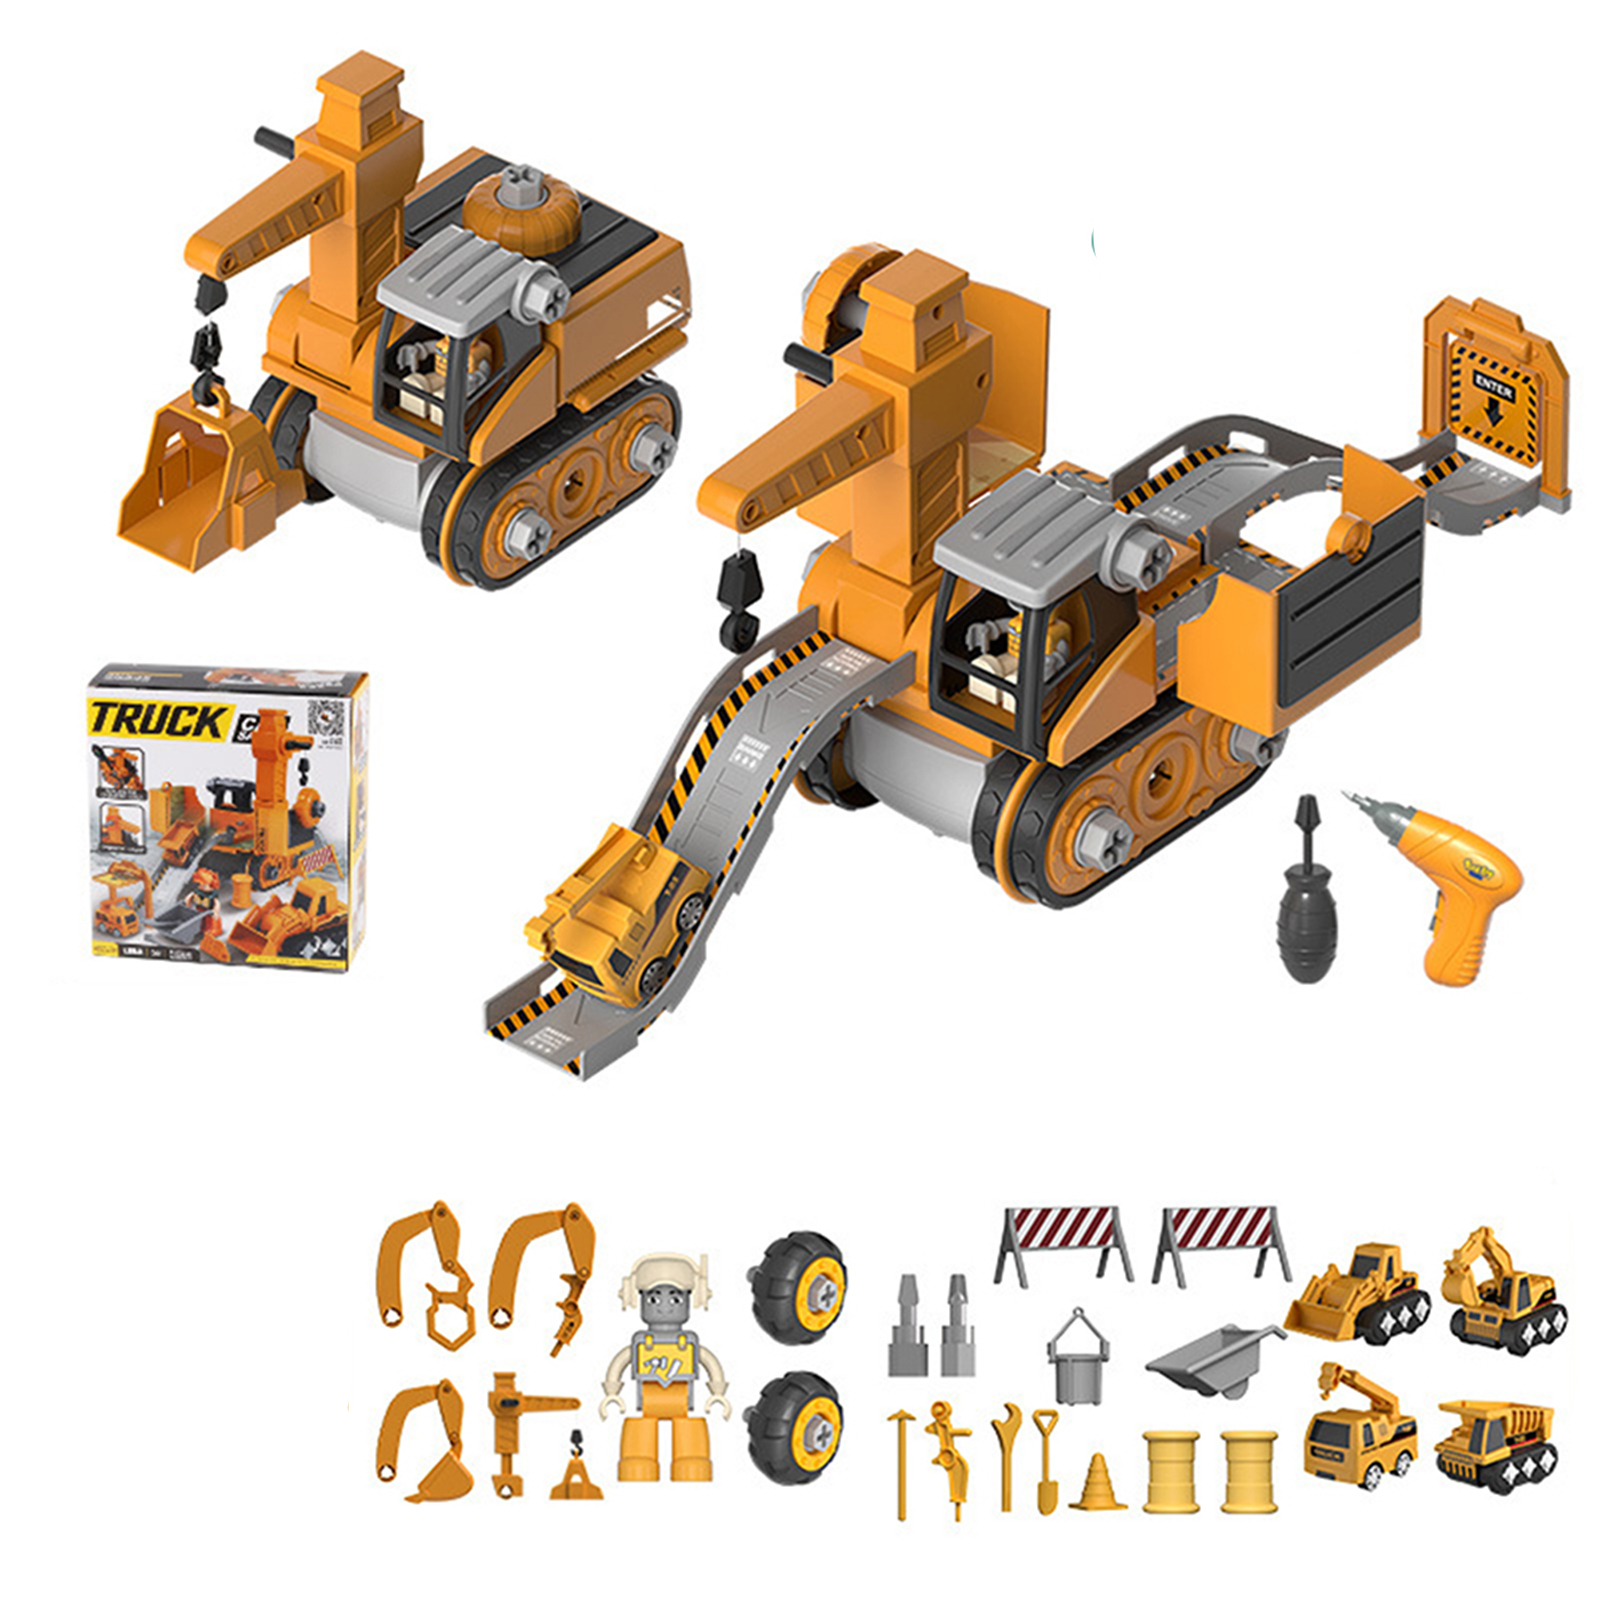 Take Apart Toys With Electric Drill Take Apart Truck Construction Set DIY Engineering Vehicle Building Toy Gifts For Boys Girls